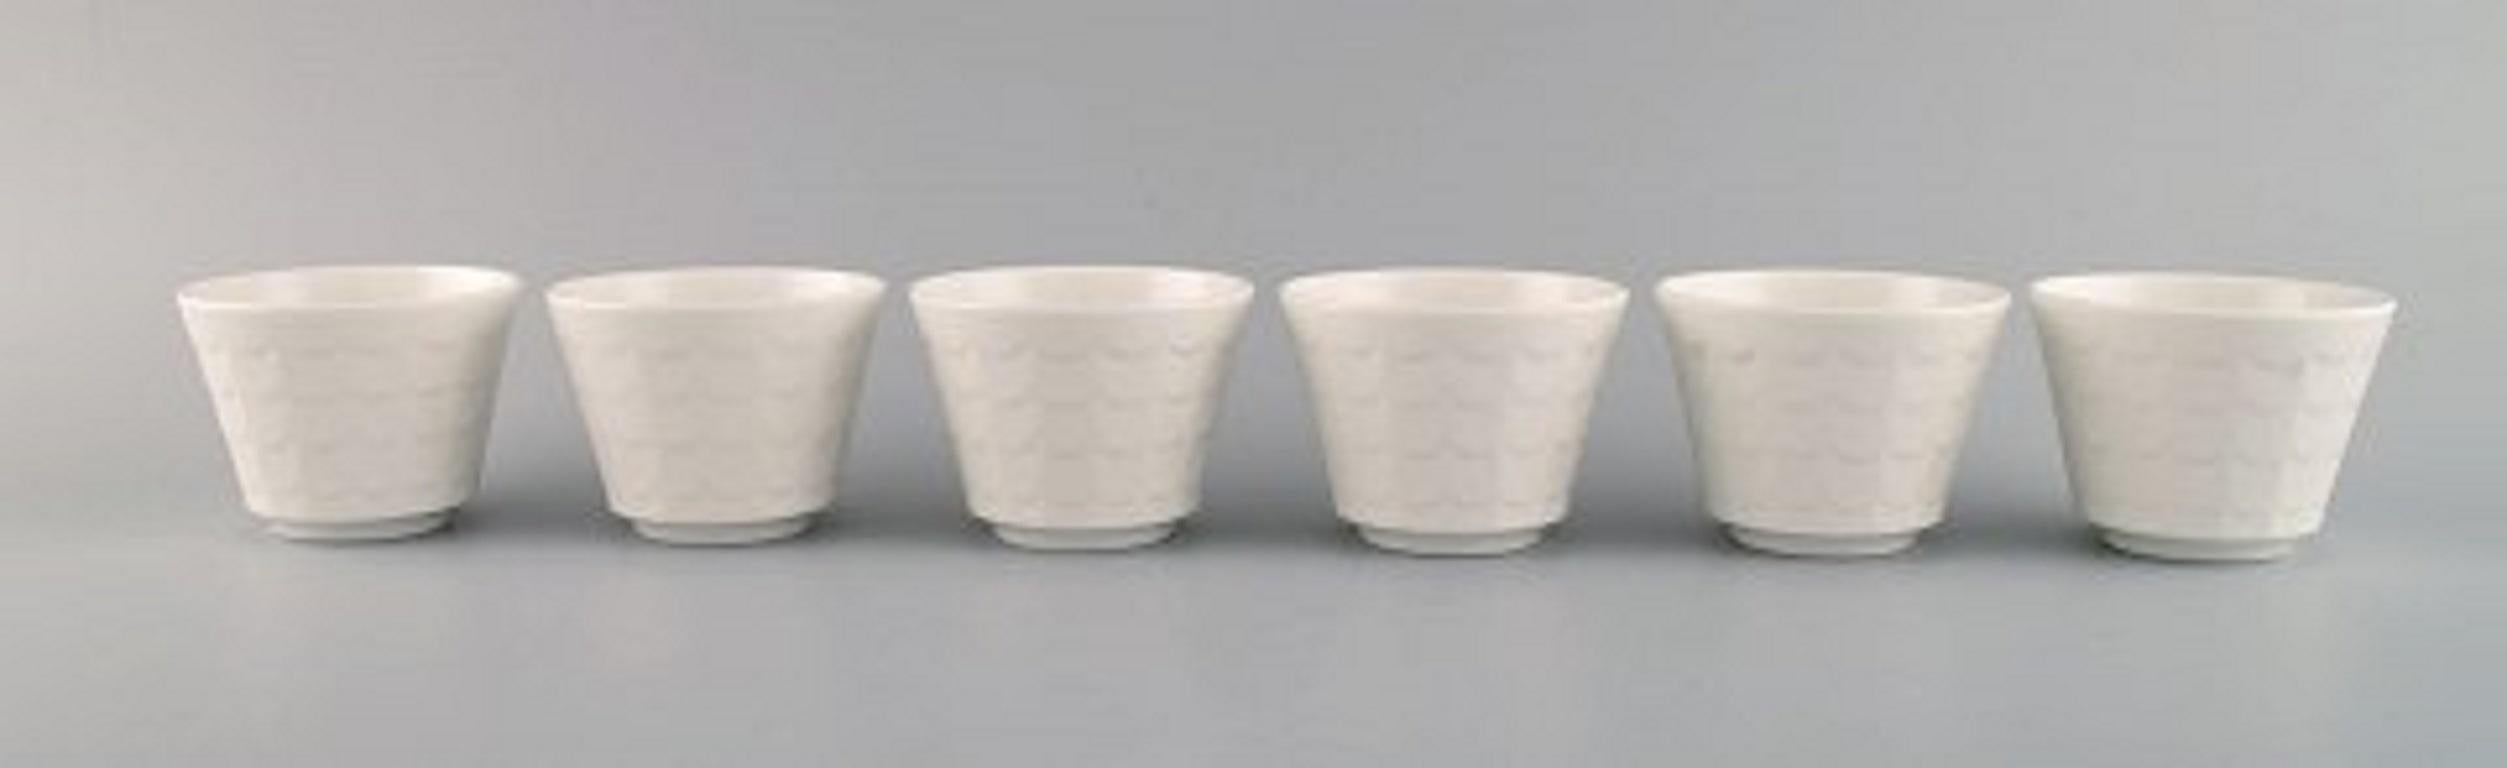 Wilhelm Kåge for Gustavsberg. Six flower pot covers in porcelain. Swedish design, 1960s.
Measures: 8 x 6 cm.
In excellent condition.
Stamped.